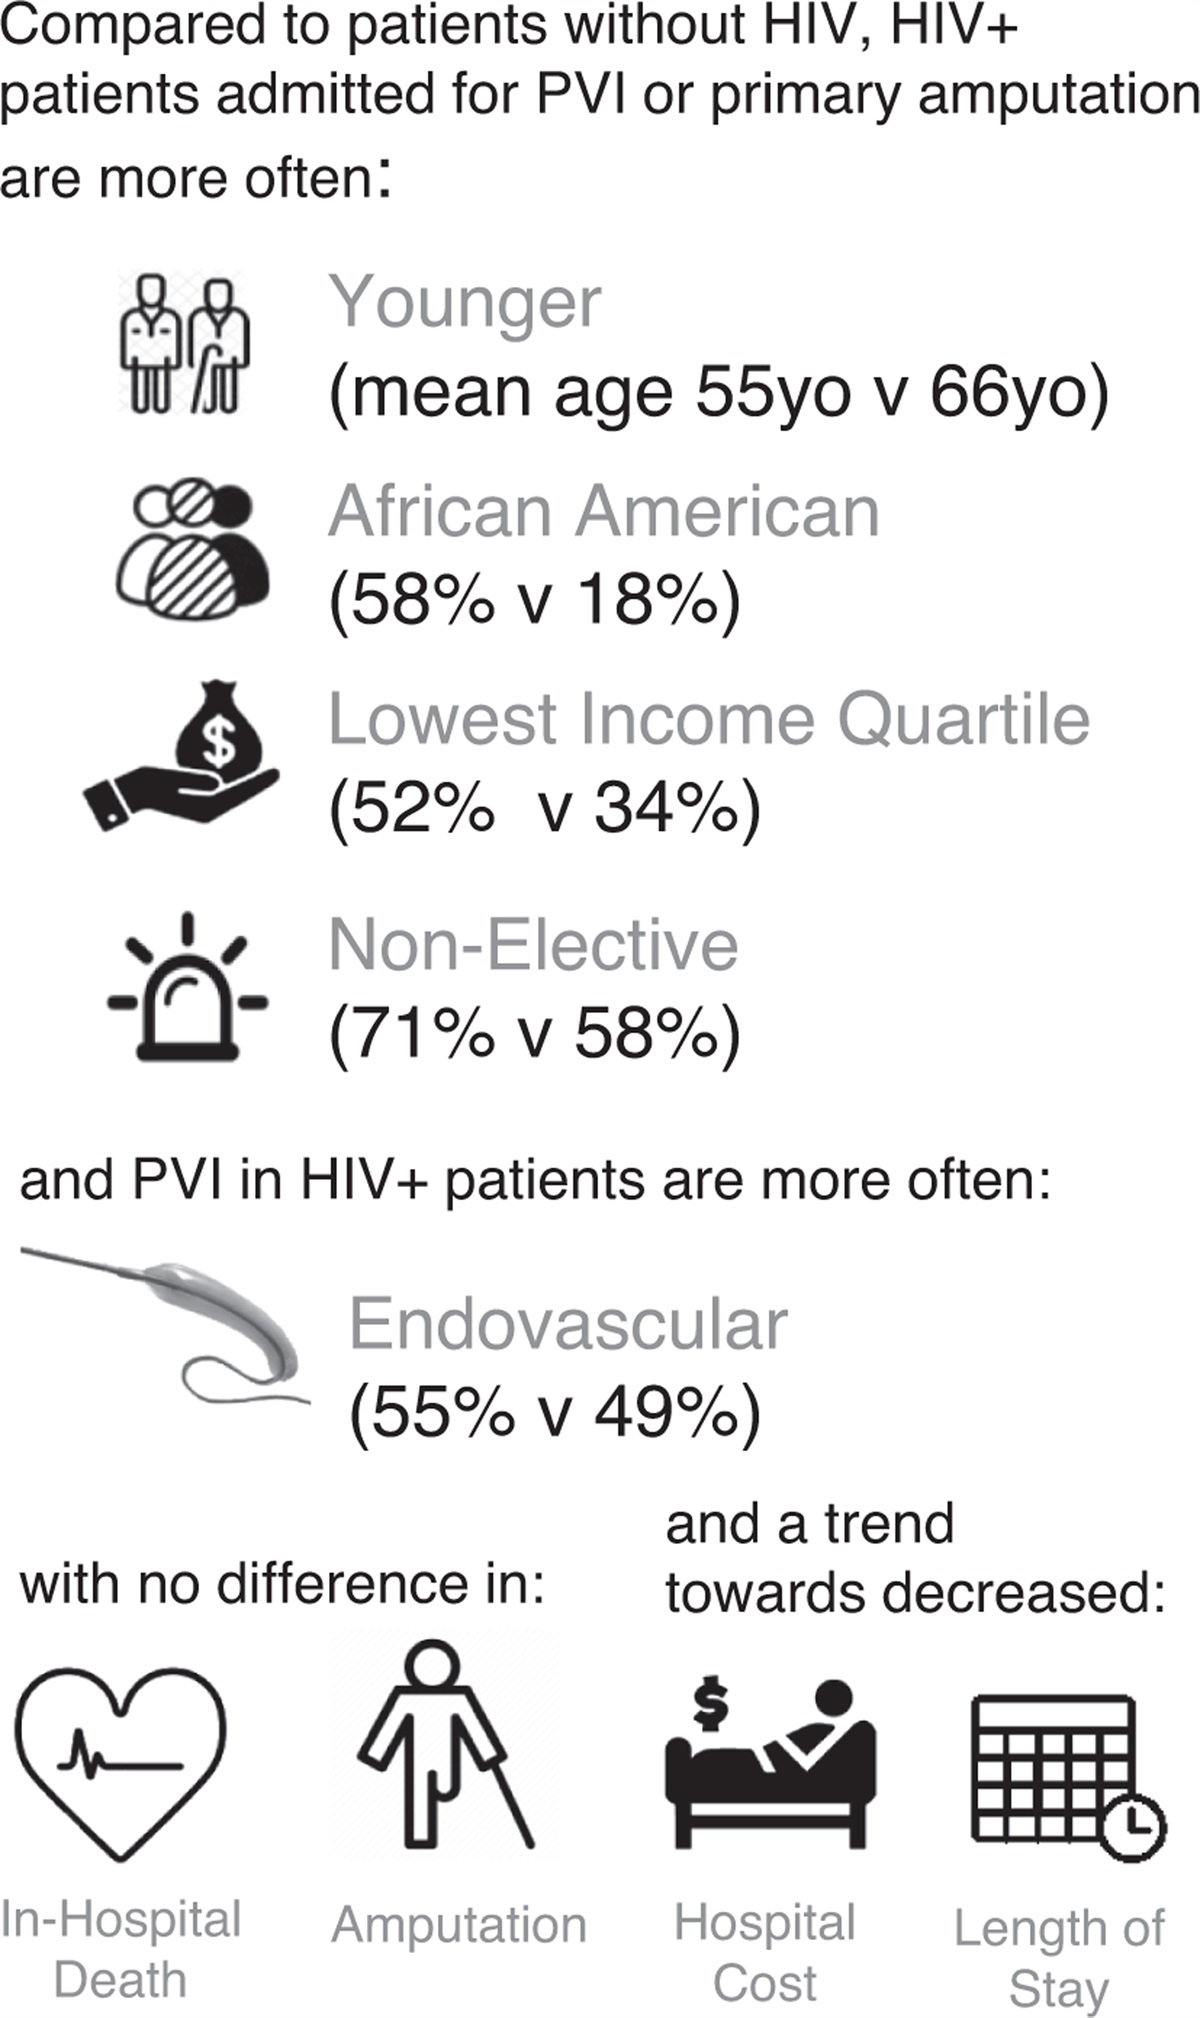 Temporal trends and outcomes of peripheral artery disease revascularization and amputation among the HIV population